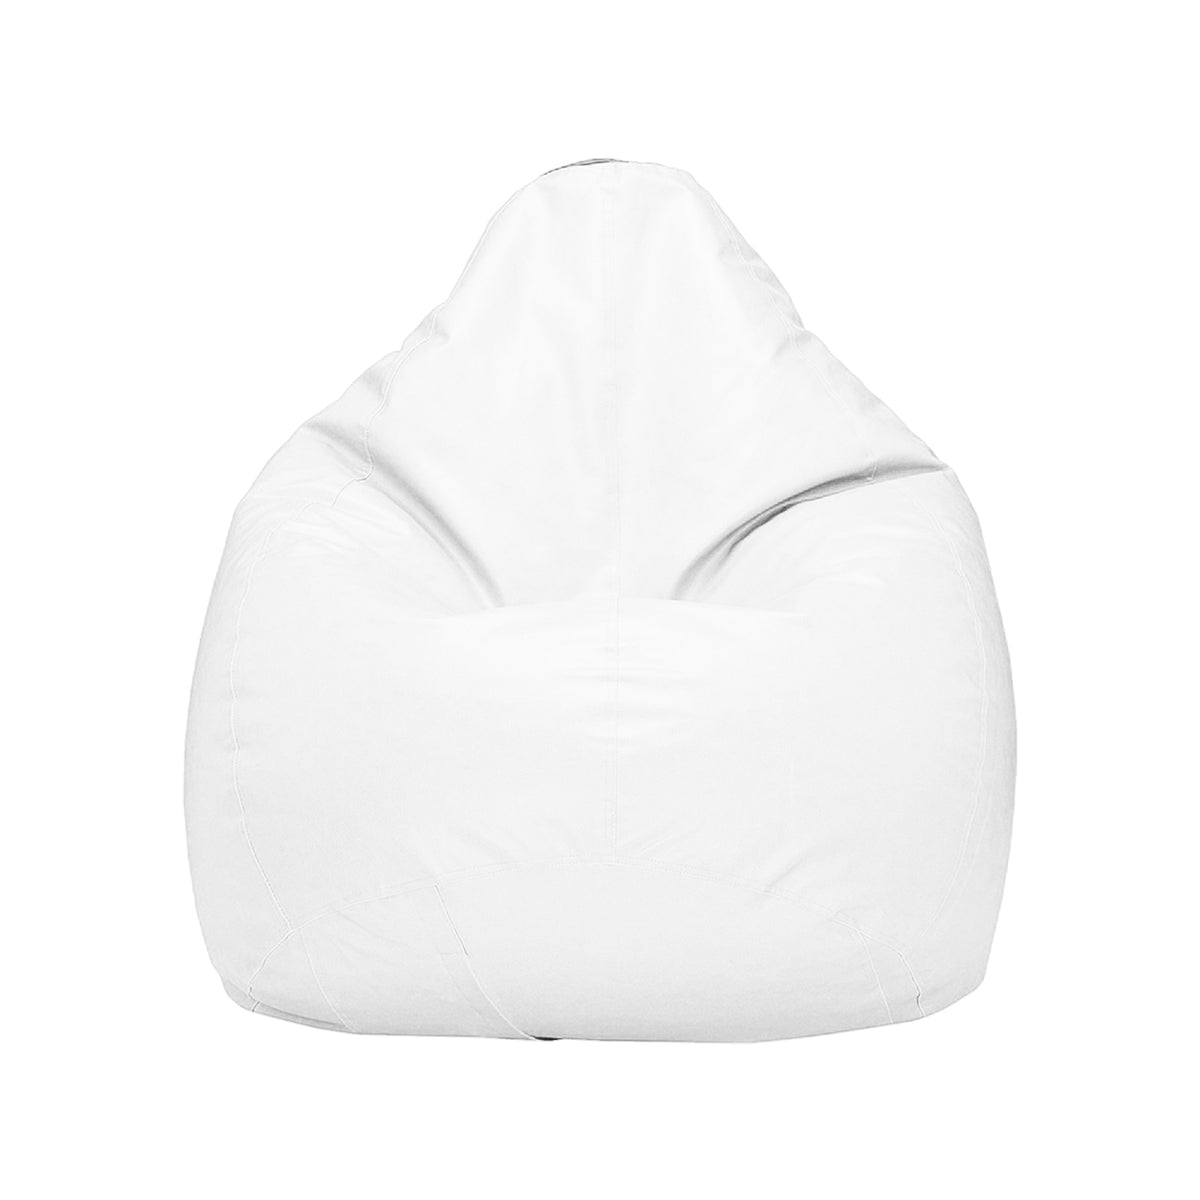 Leatherette Bean Bag Cover- Solid color